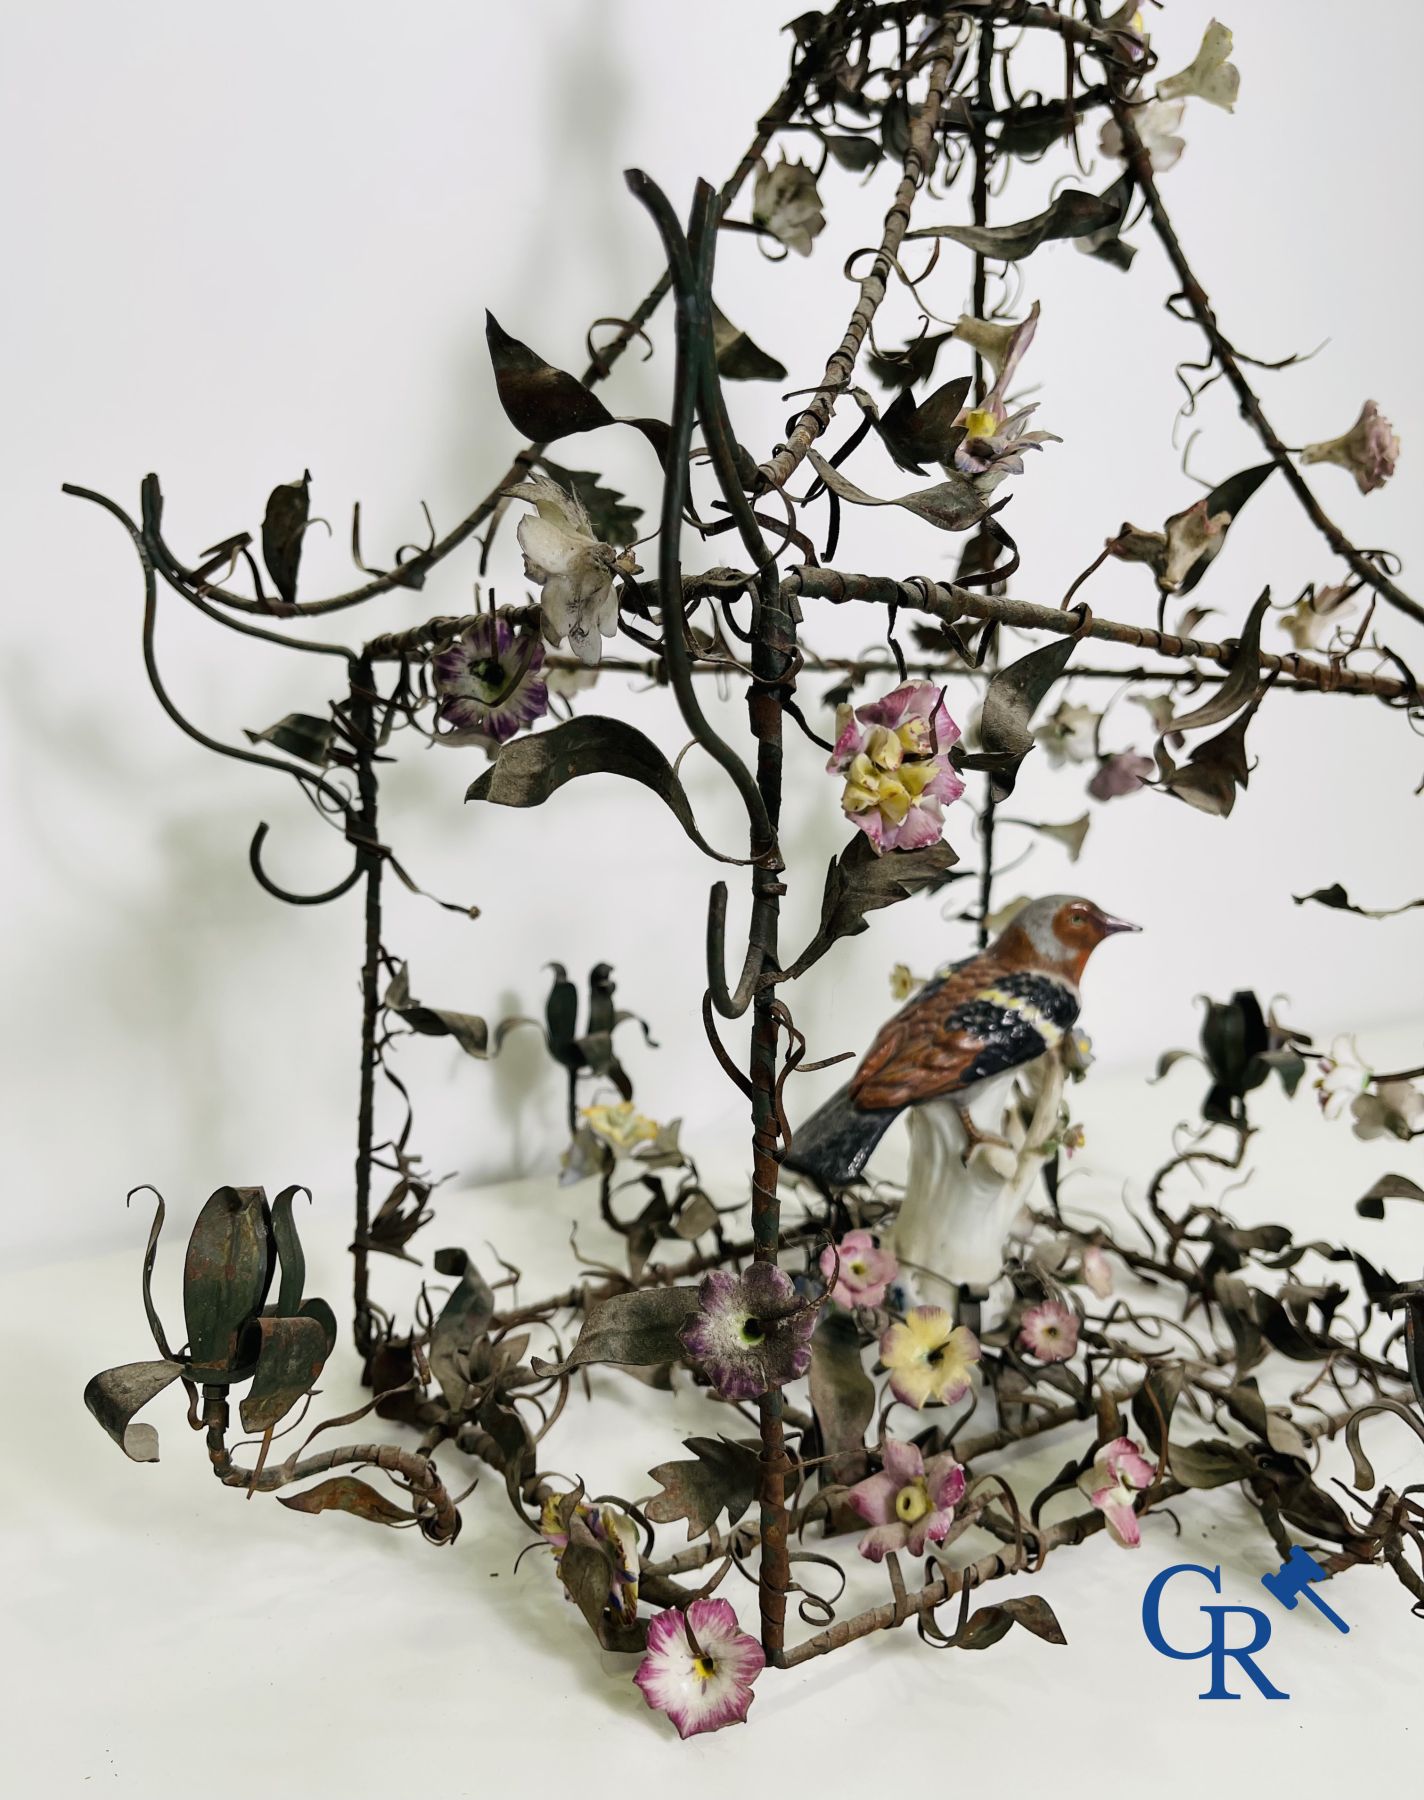 Chandelier with porcelain flowers and a bird in the manner of Meissen or Sèvres. 19th century. - Image 3 of 11